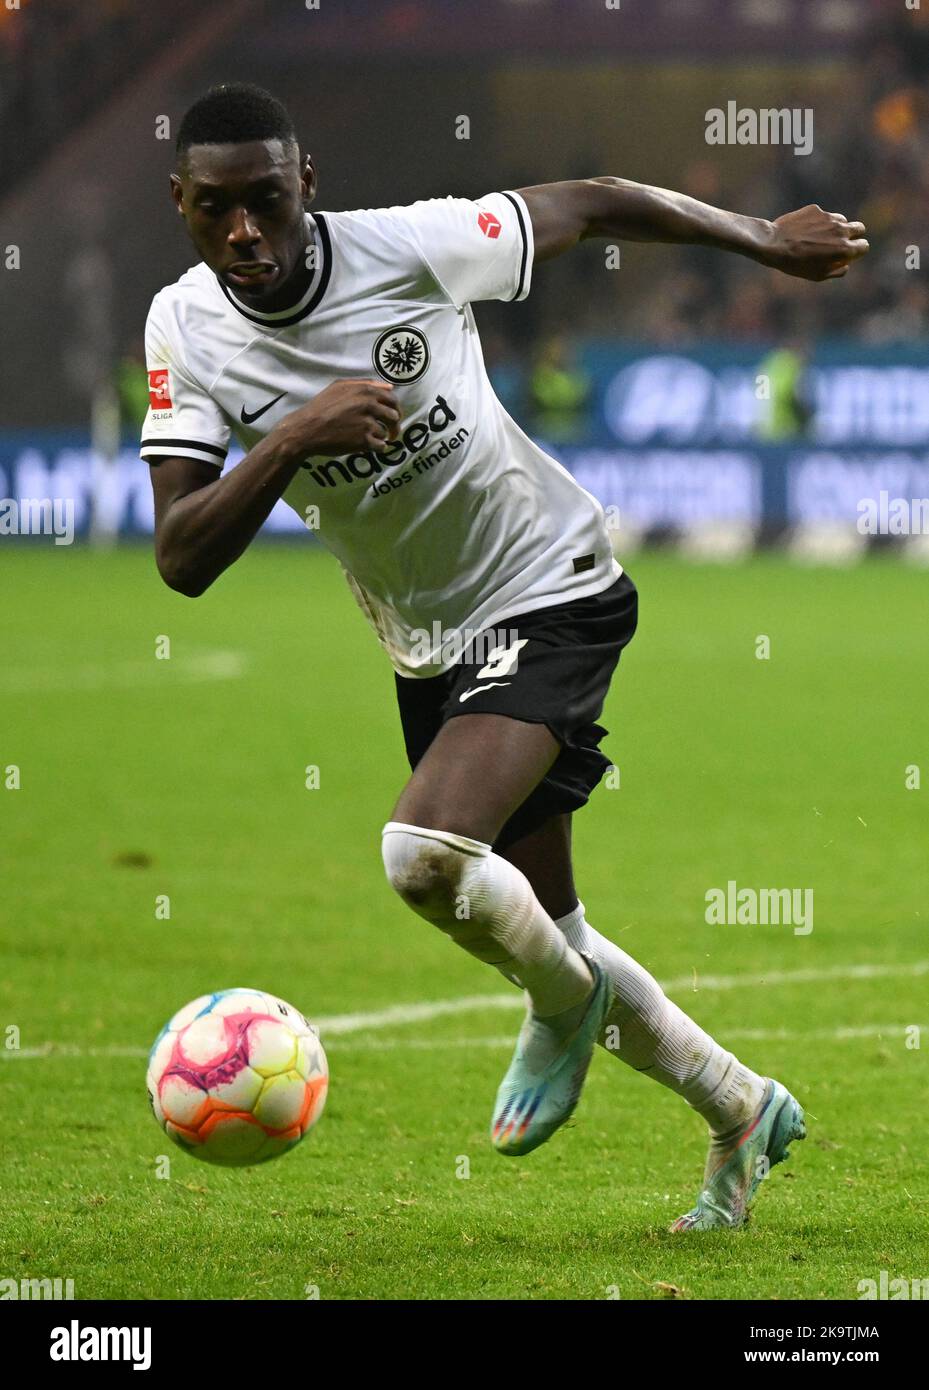 29 October 2022, Hesse, Frankfurt/Main: Soccer: Bundesliga, Eintracht Frankfurt - Borussia Dortmund, Matchday 12 at Deutsche Bank Park. Frankfurt's Randal Kolo Muani in action. Photo: Arne Dedert/dpa - IMPORTANT NOTE: In accordance with the requirements of the DFL Deutsche Fußball Liga and the DFB Deutscher Fußball-Bund, it is prohibited to use or have used photographs taken in the stadium and/or of the match in the form of sequence pictures and/or video-like photo series. Stock Photo